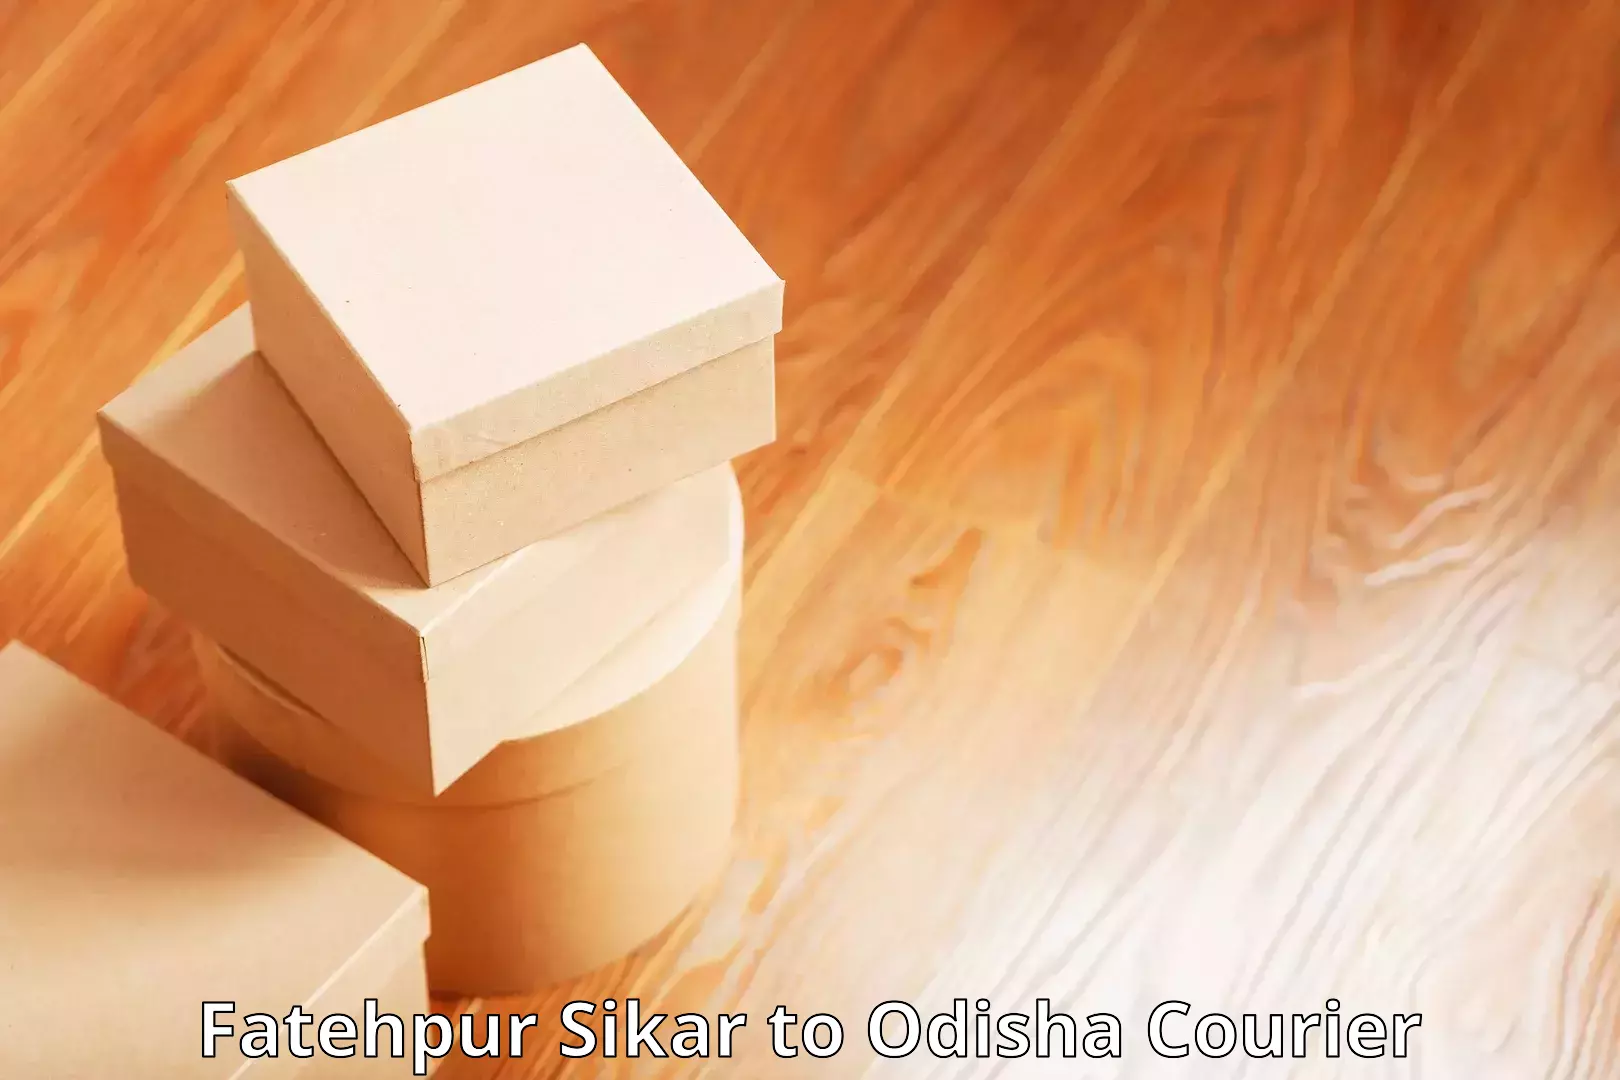 Specialized courier services Fatehpur Sikar to Odisha